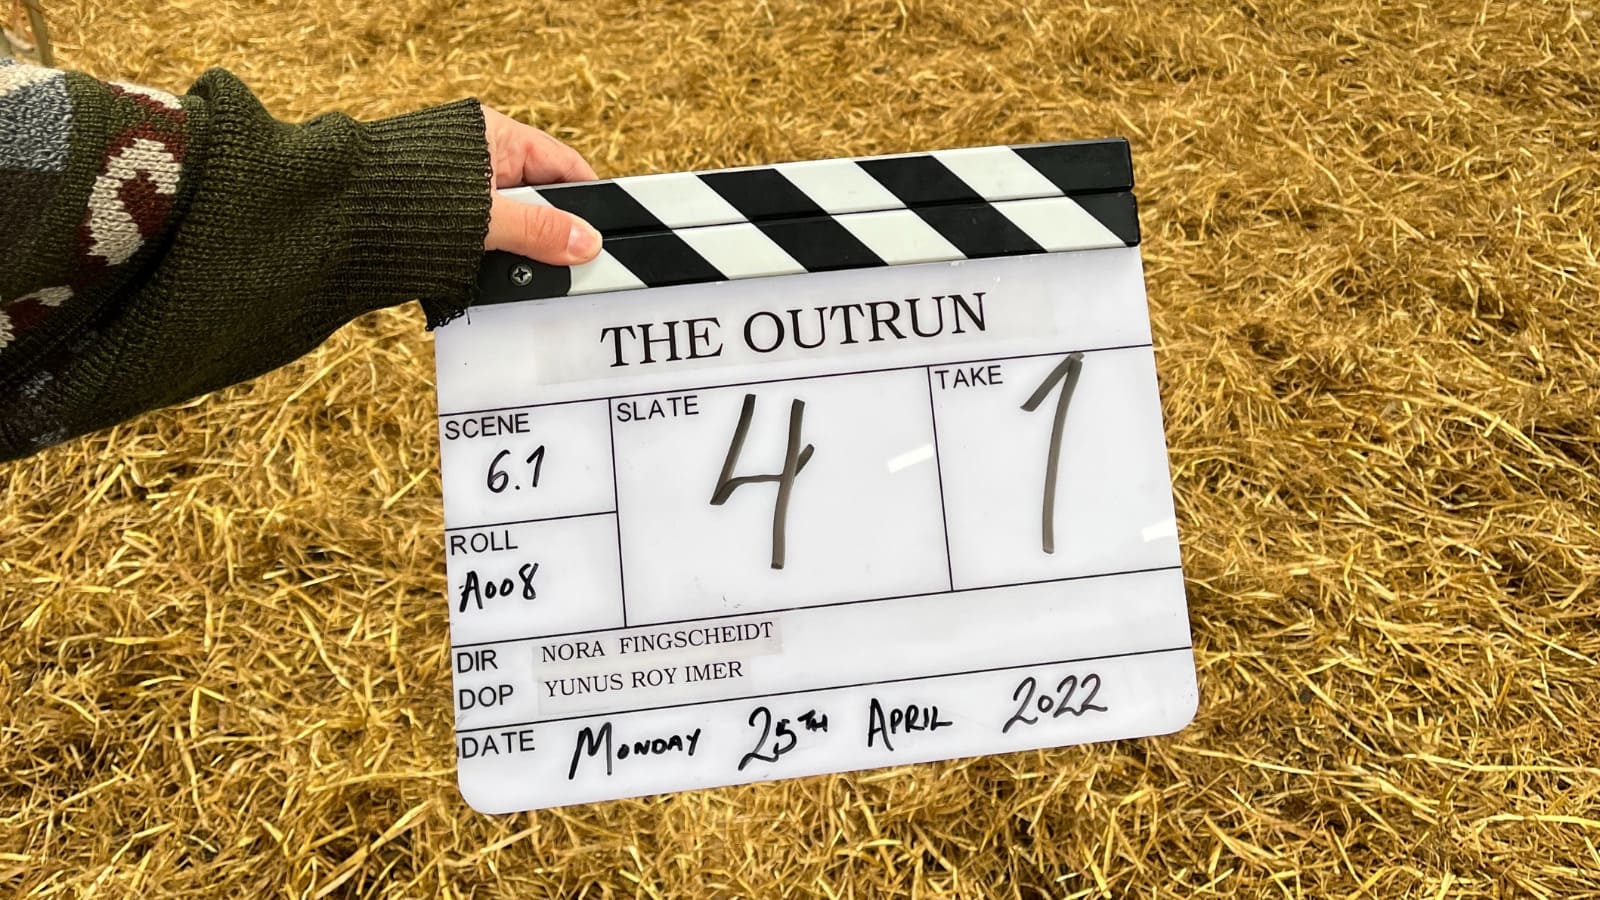 A hand holding a clapperboard outdoors which reads the Outrun and slate 4